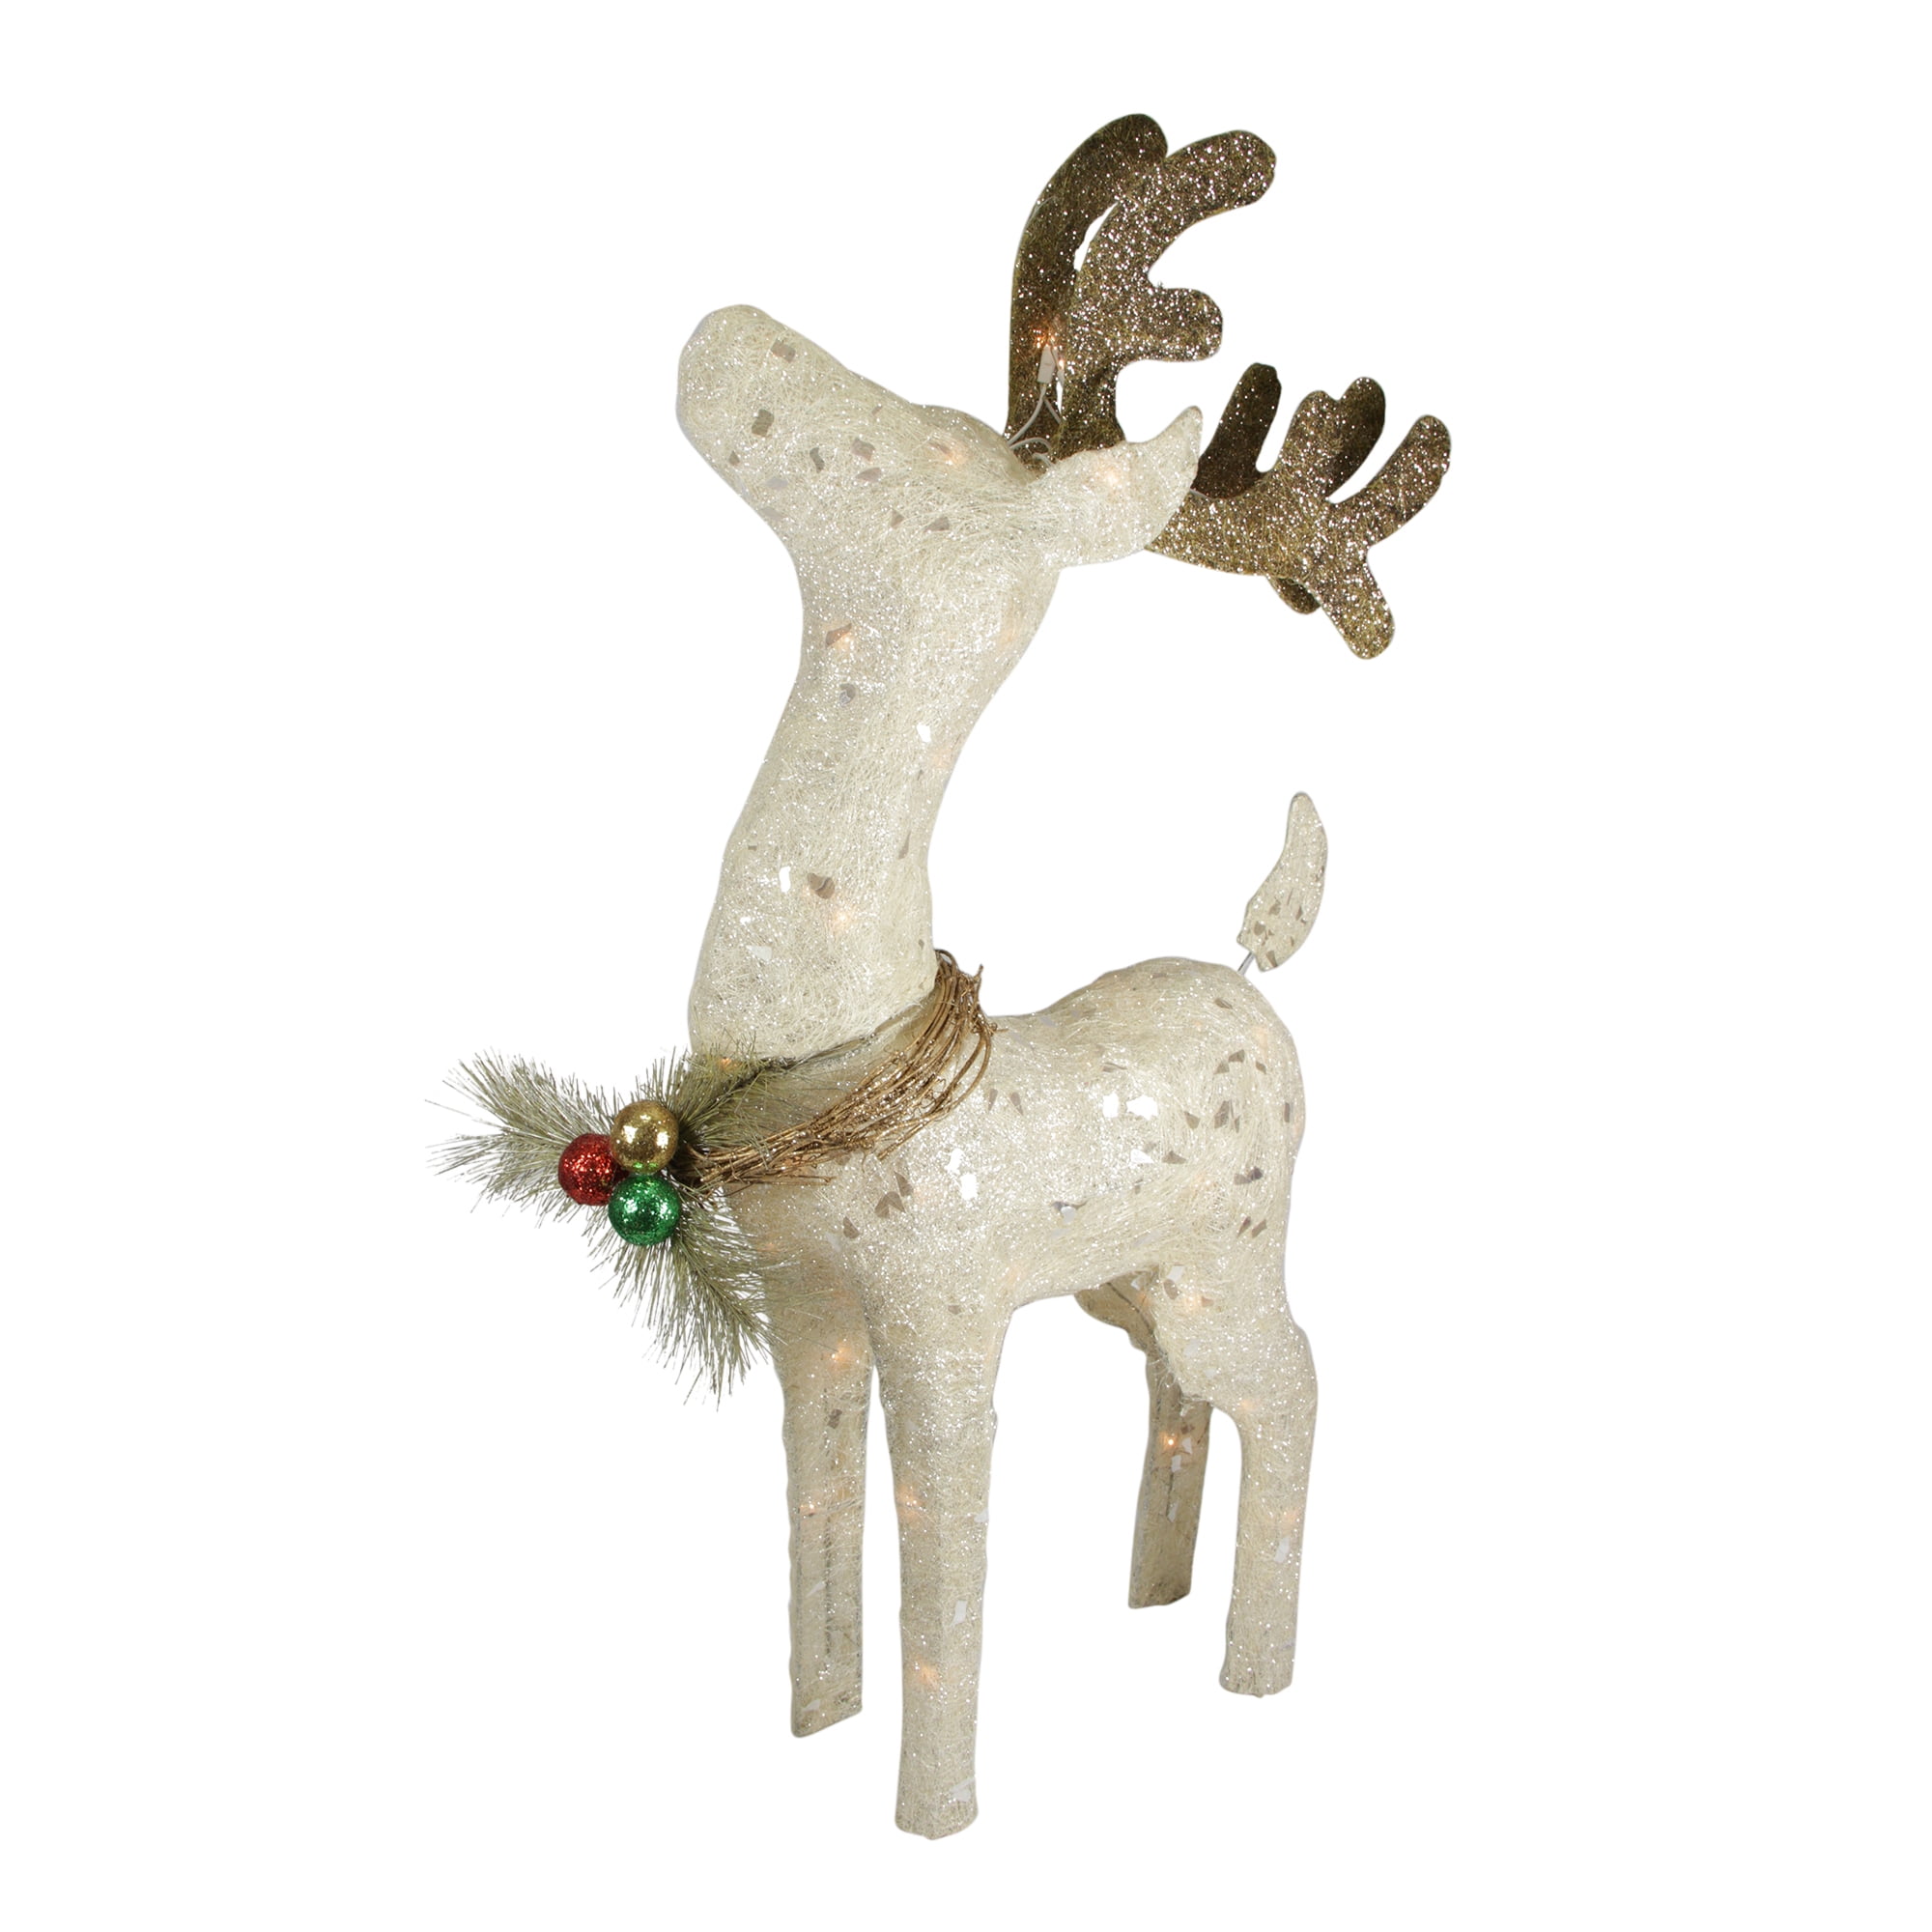 37" White and Brown Lighted Sparkling Standing Reindeer Outdoor